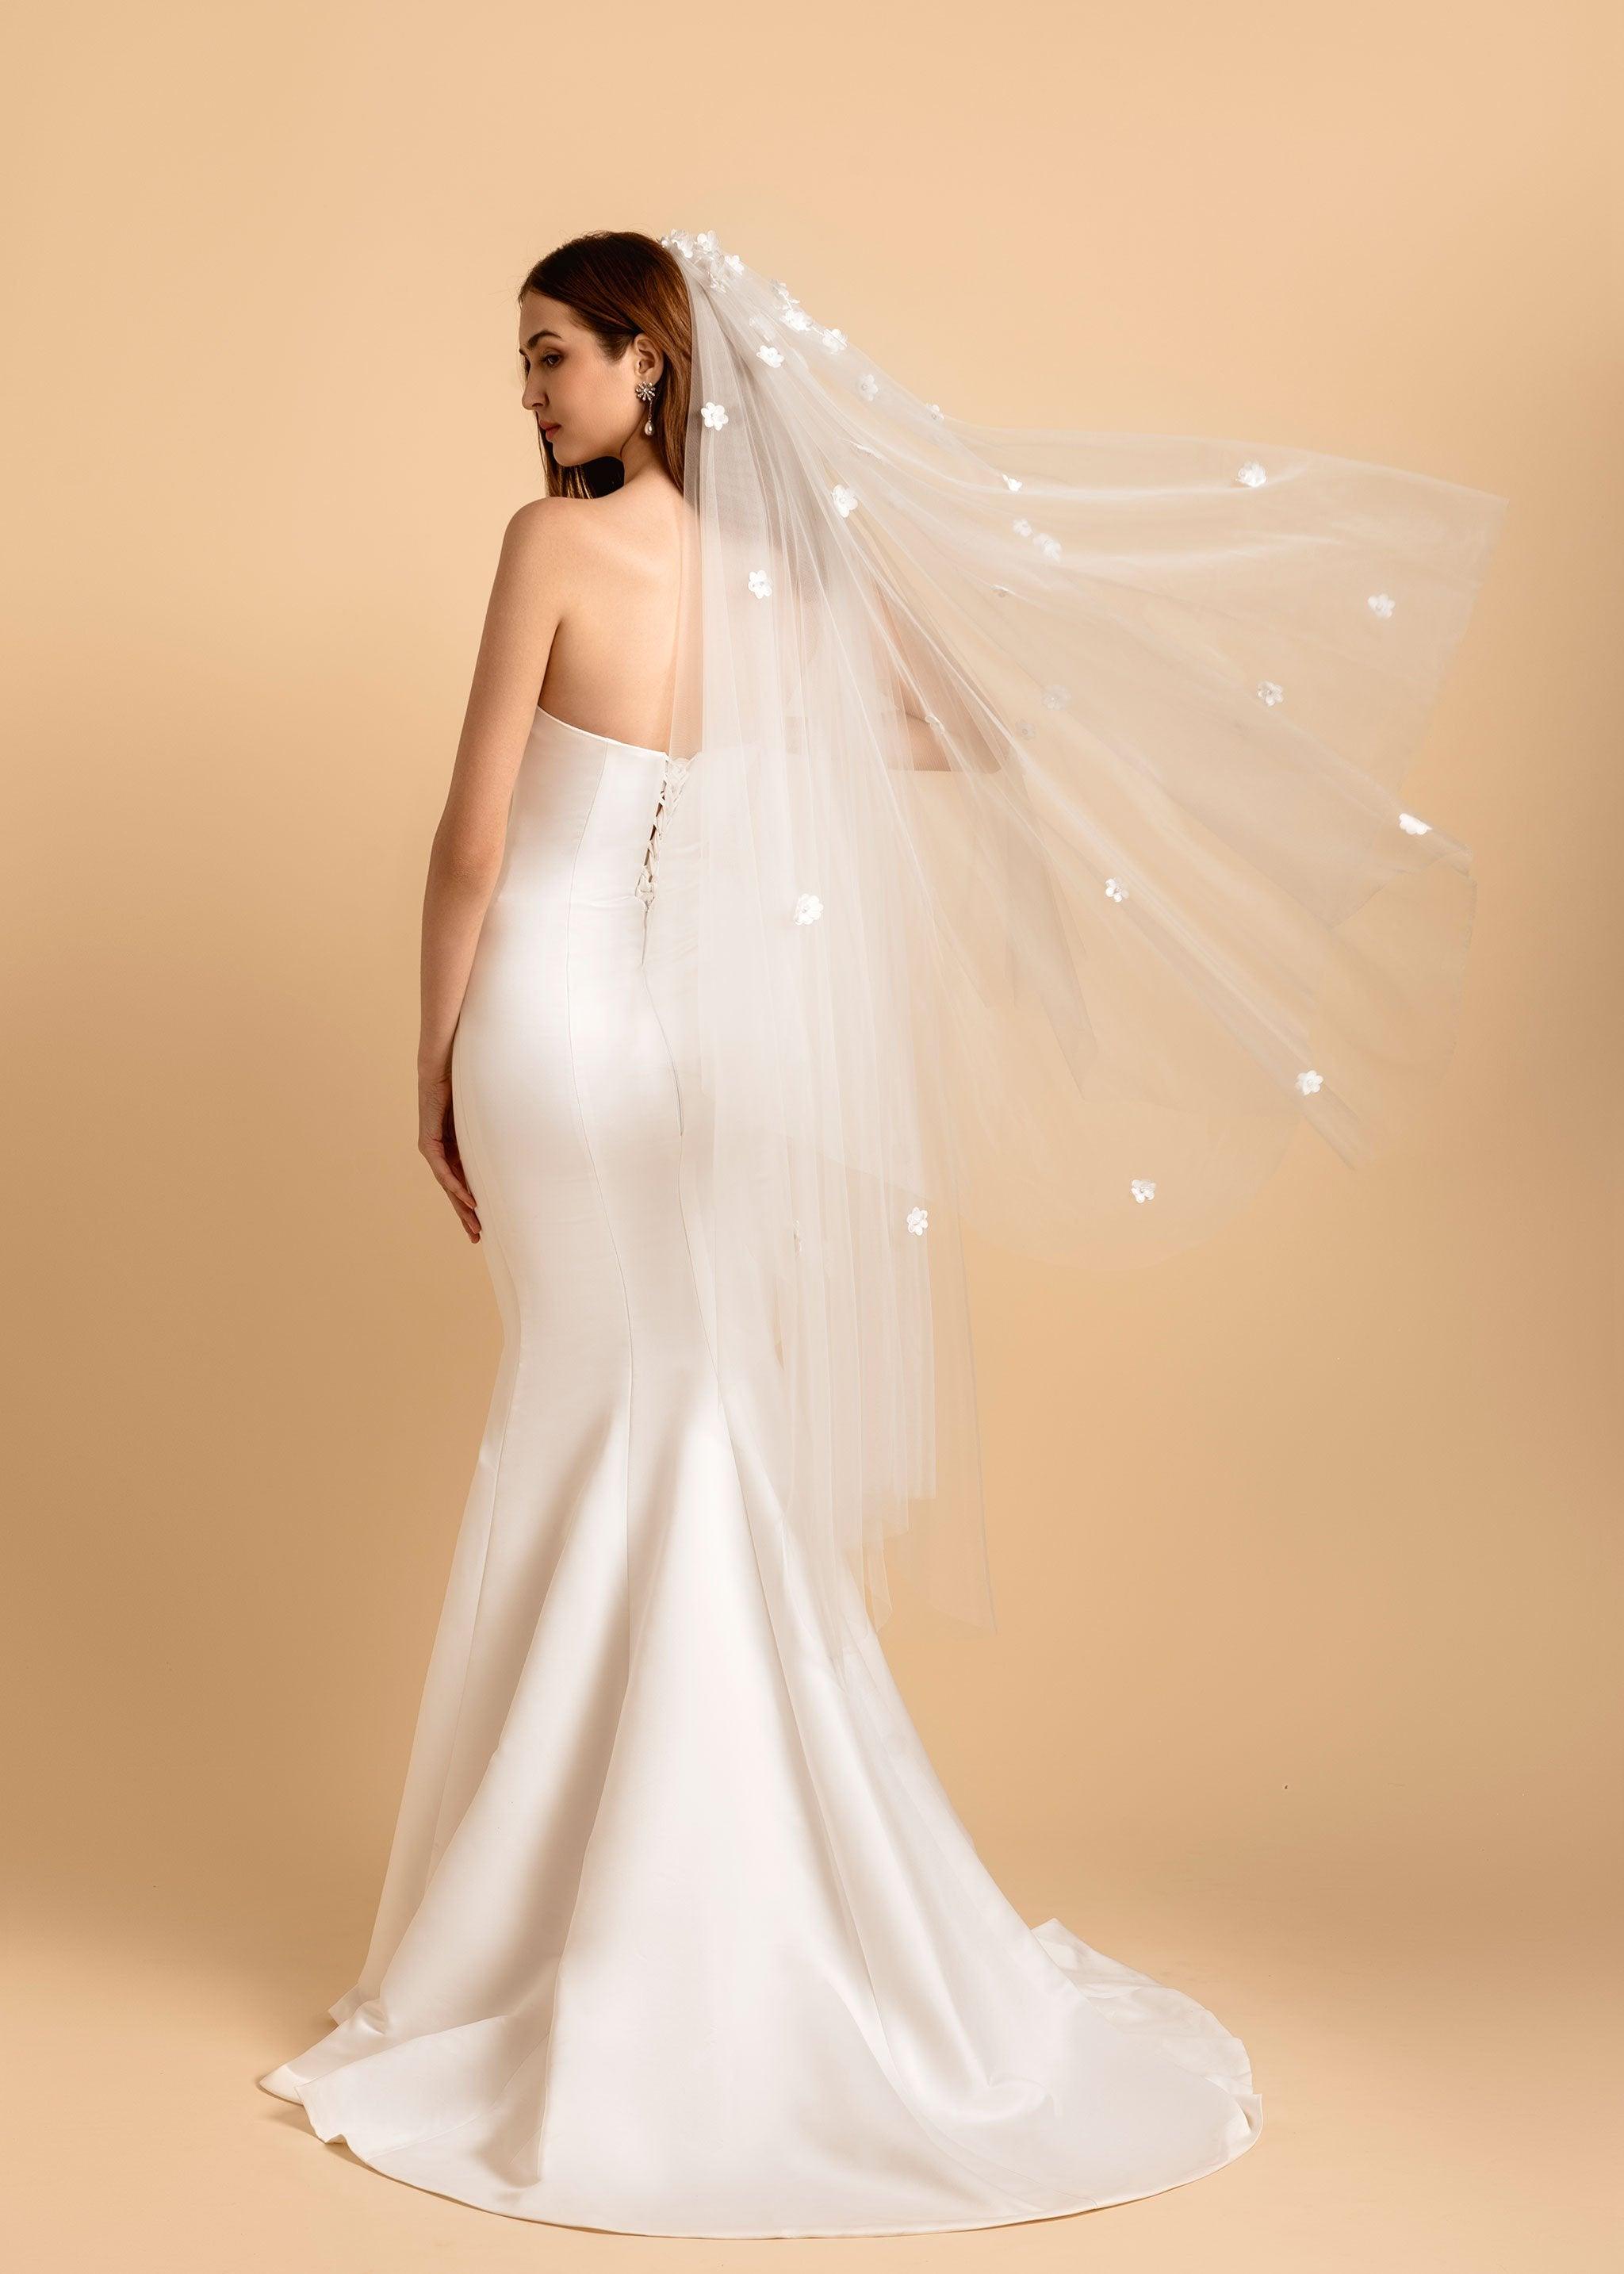 Strapless Wedding Gown | Trumpet Silhouette Dress | Dare and Dazzle